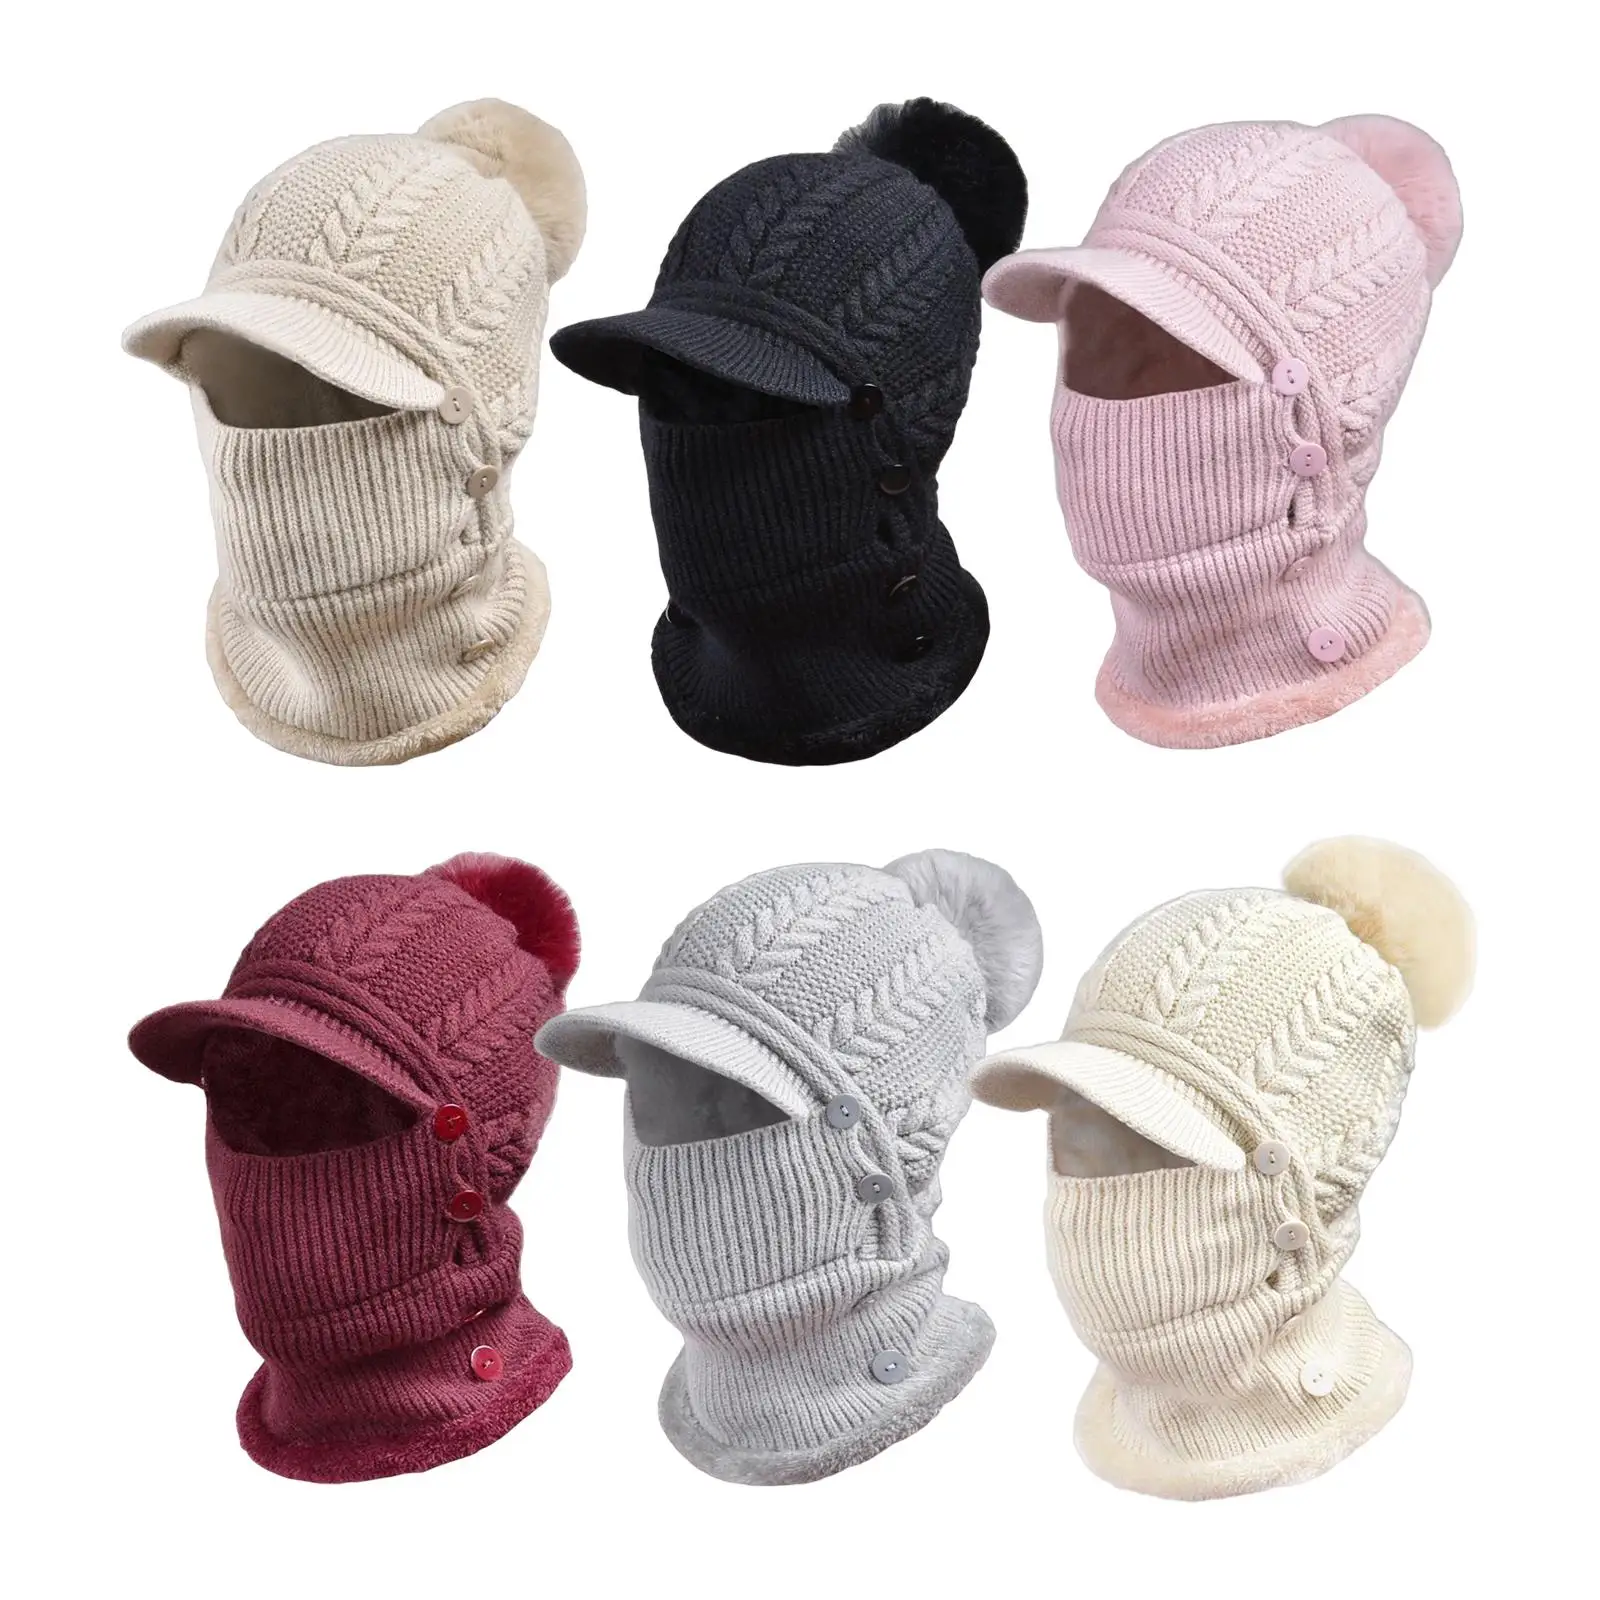 Knit Balaclava Beanie Hat Neck Scarf Protector Button Hat with Ears Covers Winter Ski Mask Cap for Skateboard Snow Women Men